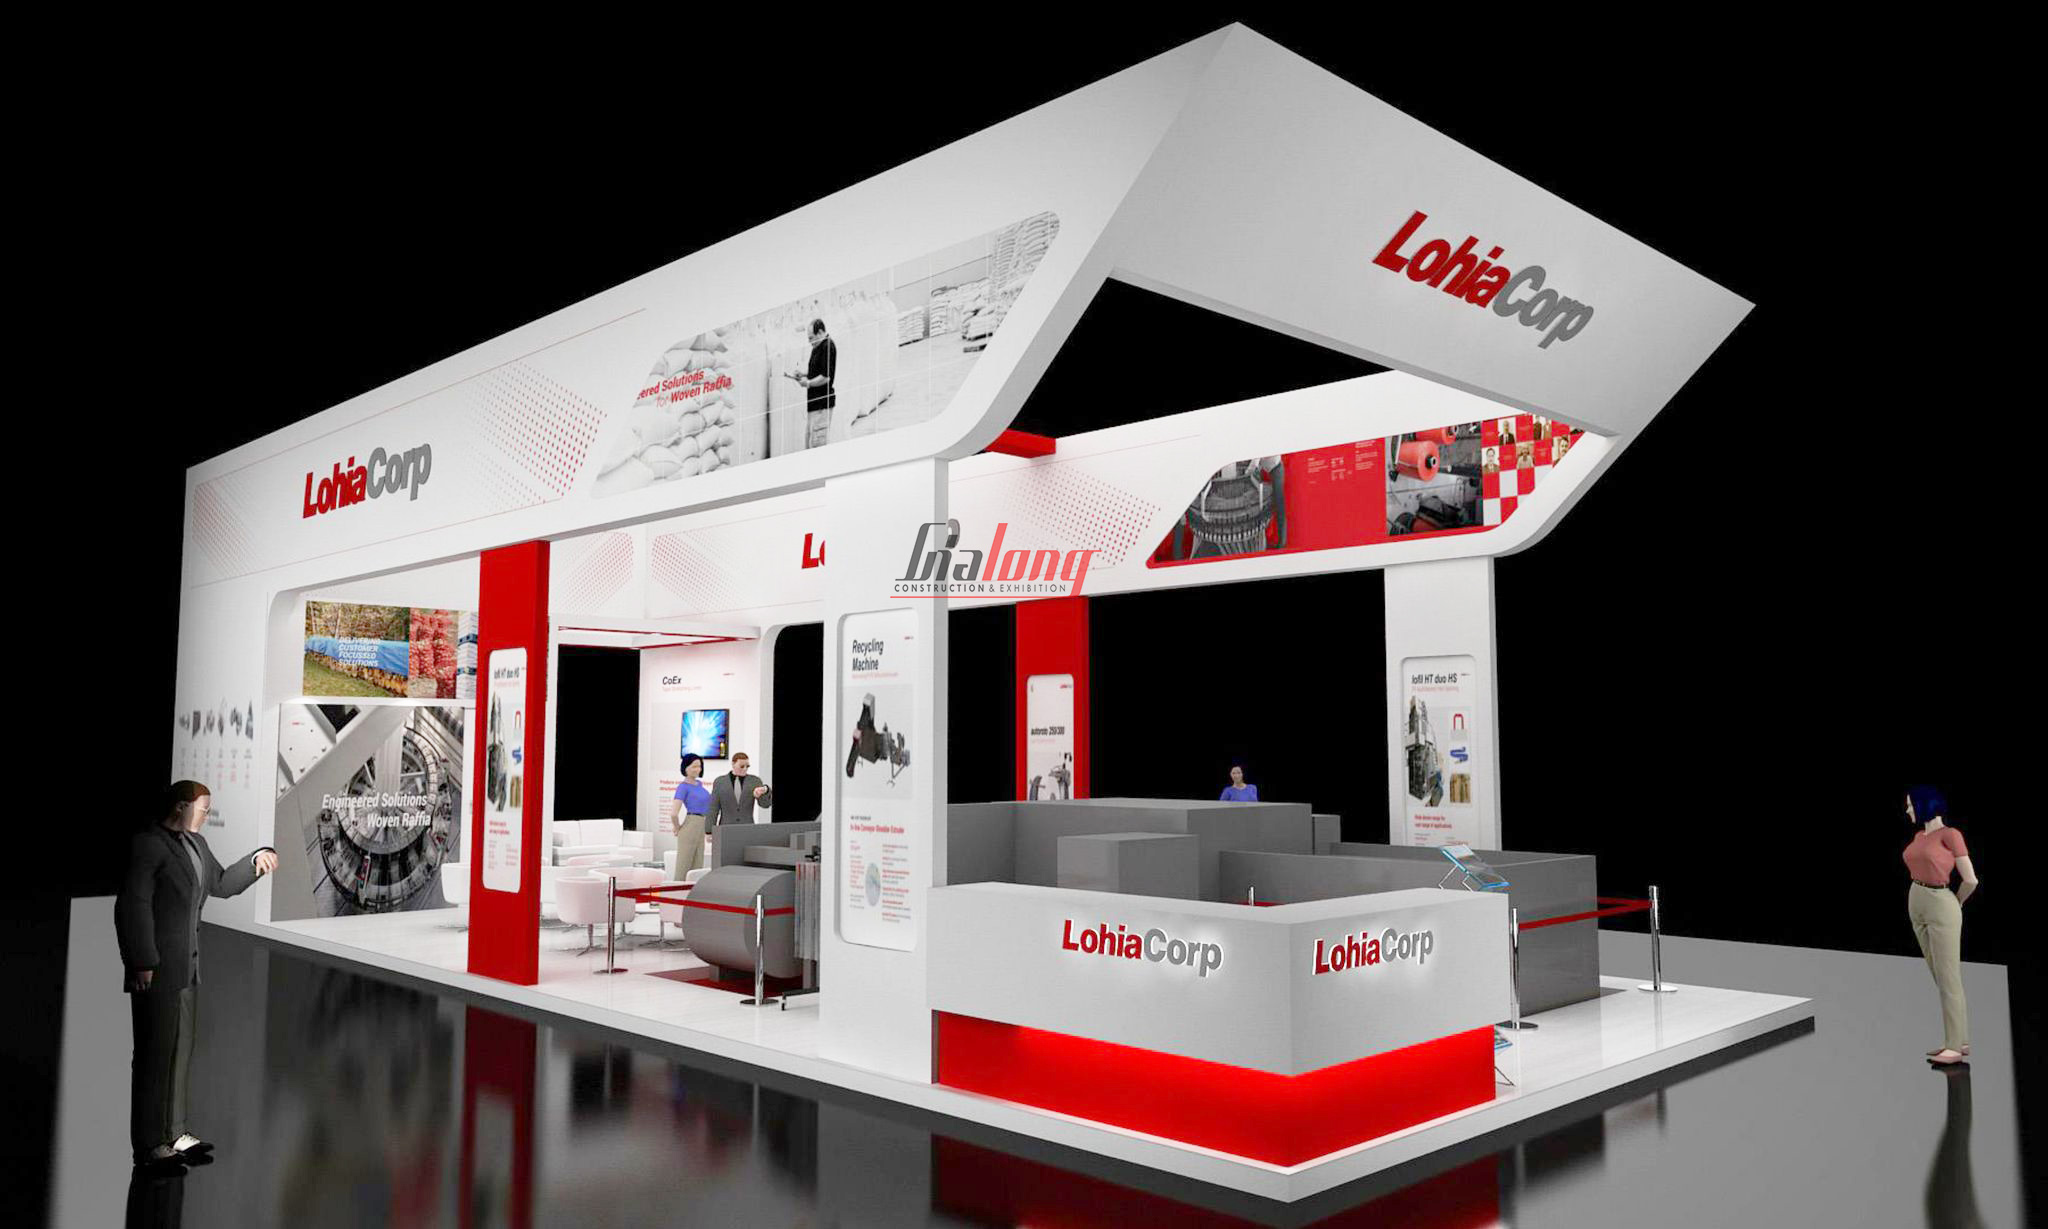 The Lohia booth was constructed and designed to completion by Gia Long